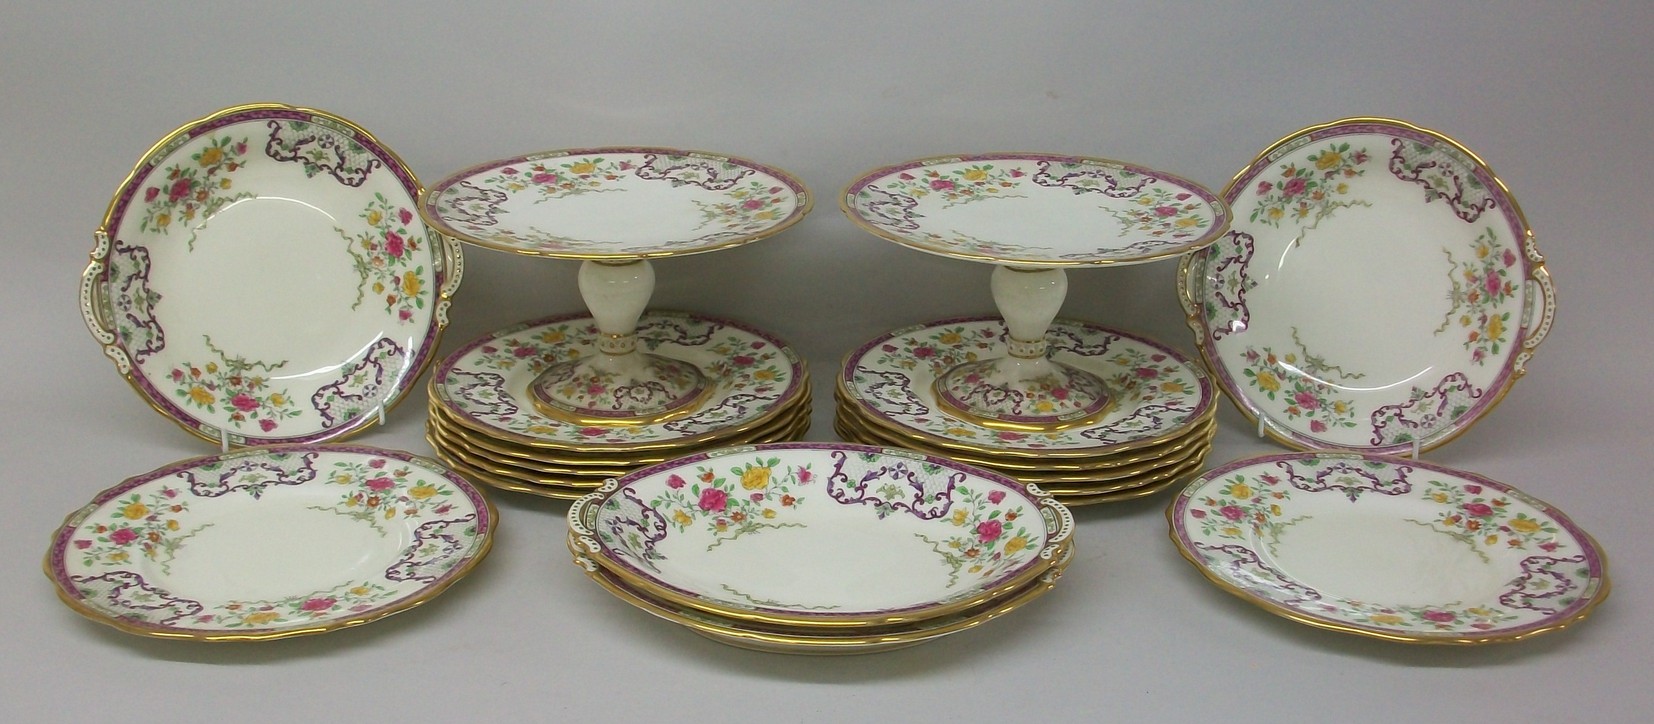 A Cauldon porcelain part dessert service, early 20th century, decorated with bouquets of flowers and